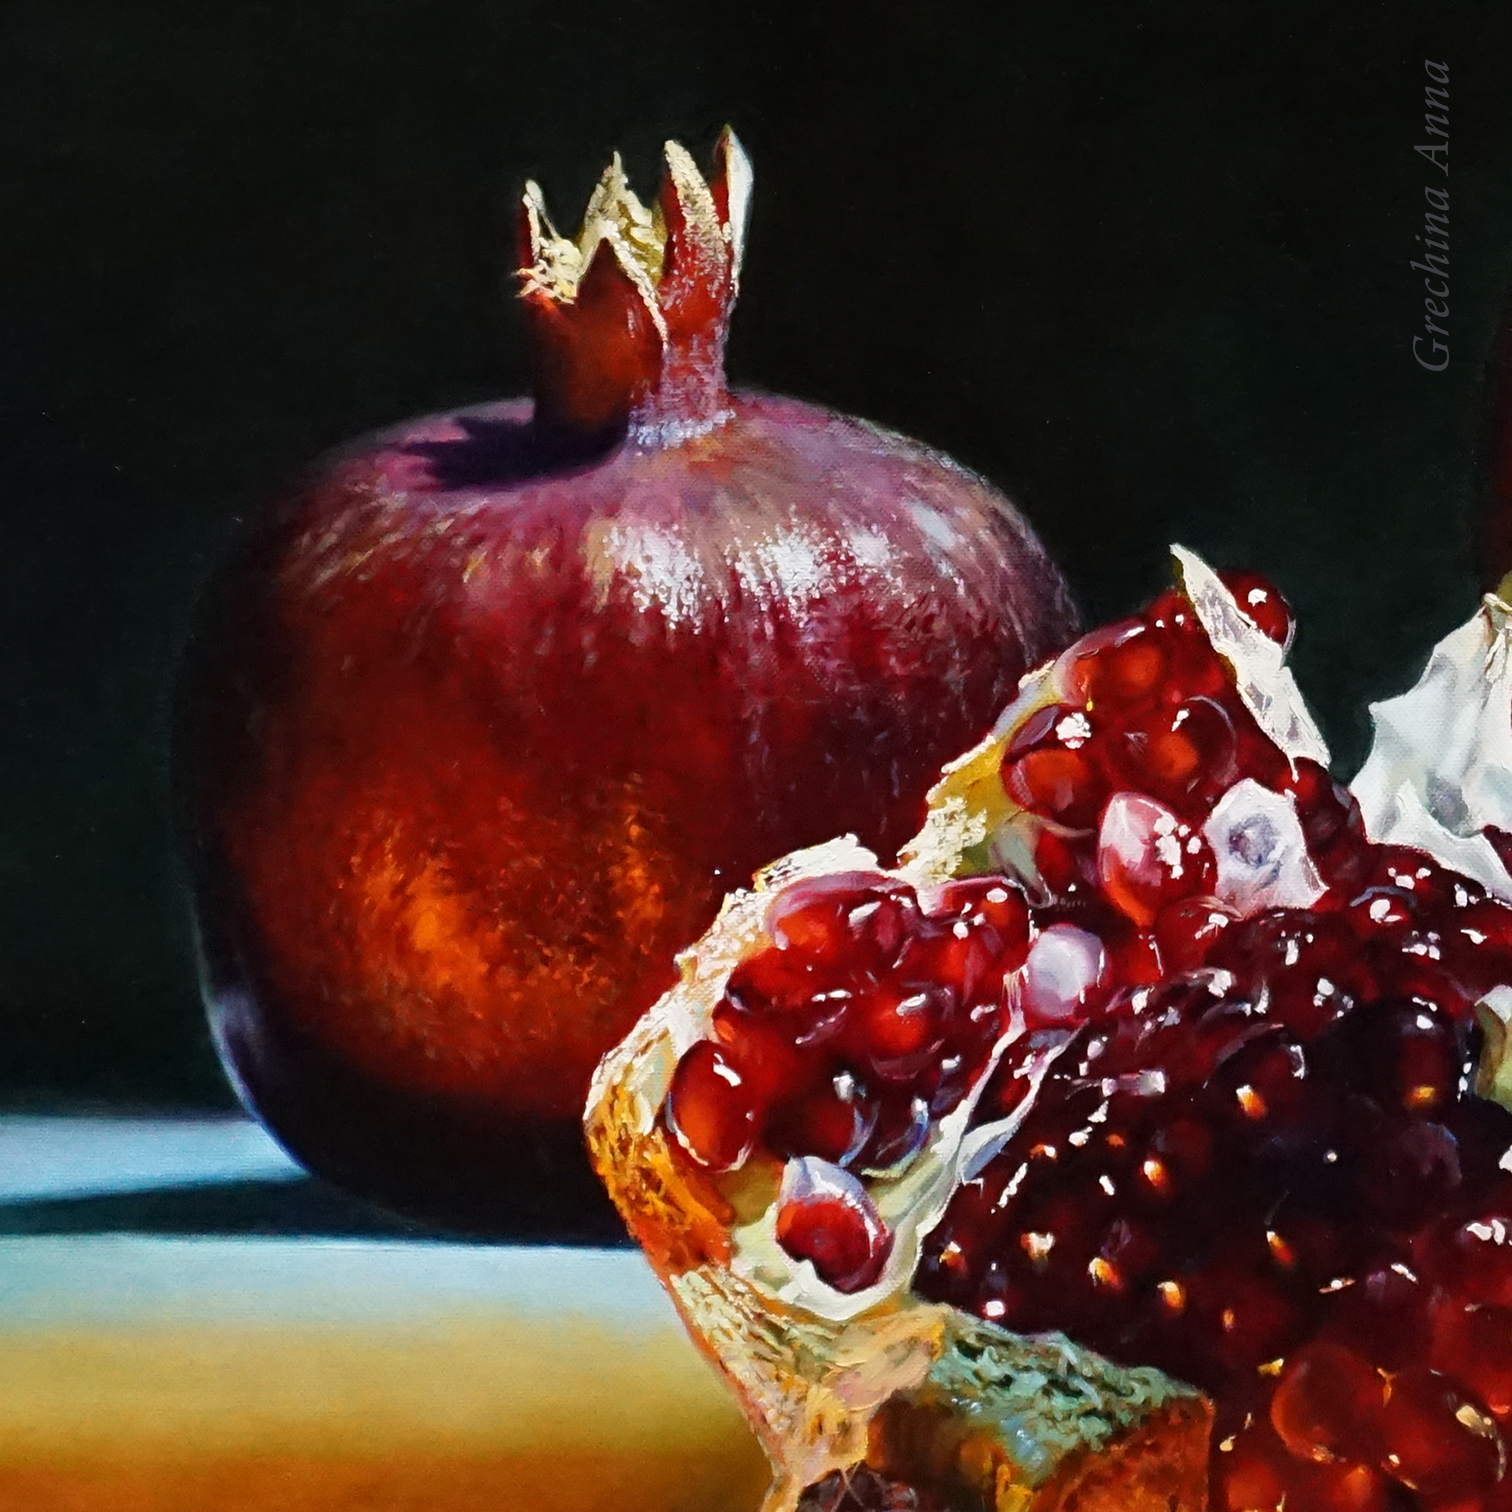 Still life "The power of a grenade". Artist  Grechina Anna. Paintings, painting, hyperrealism.